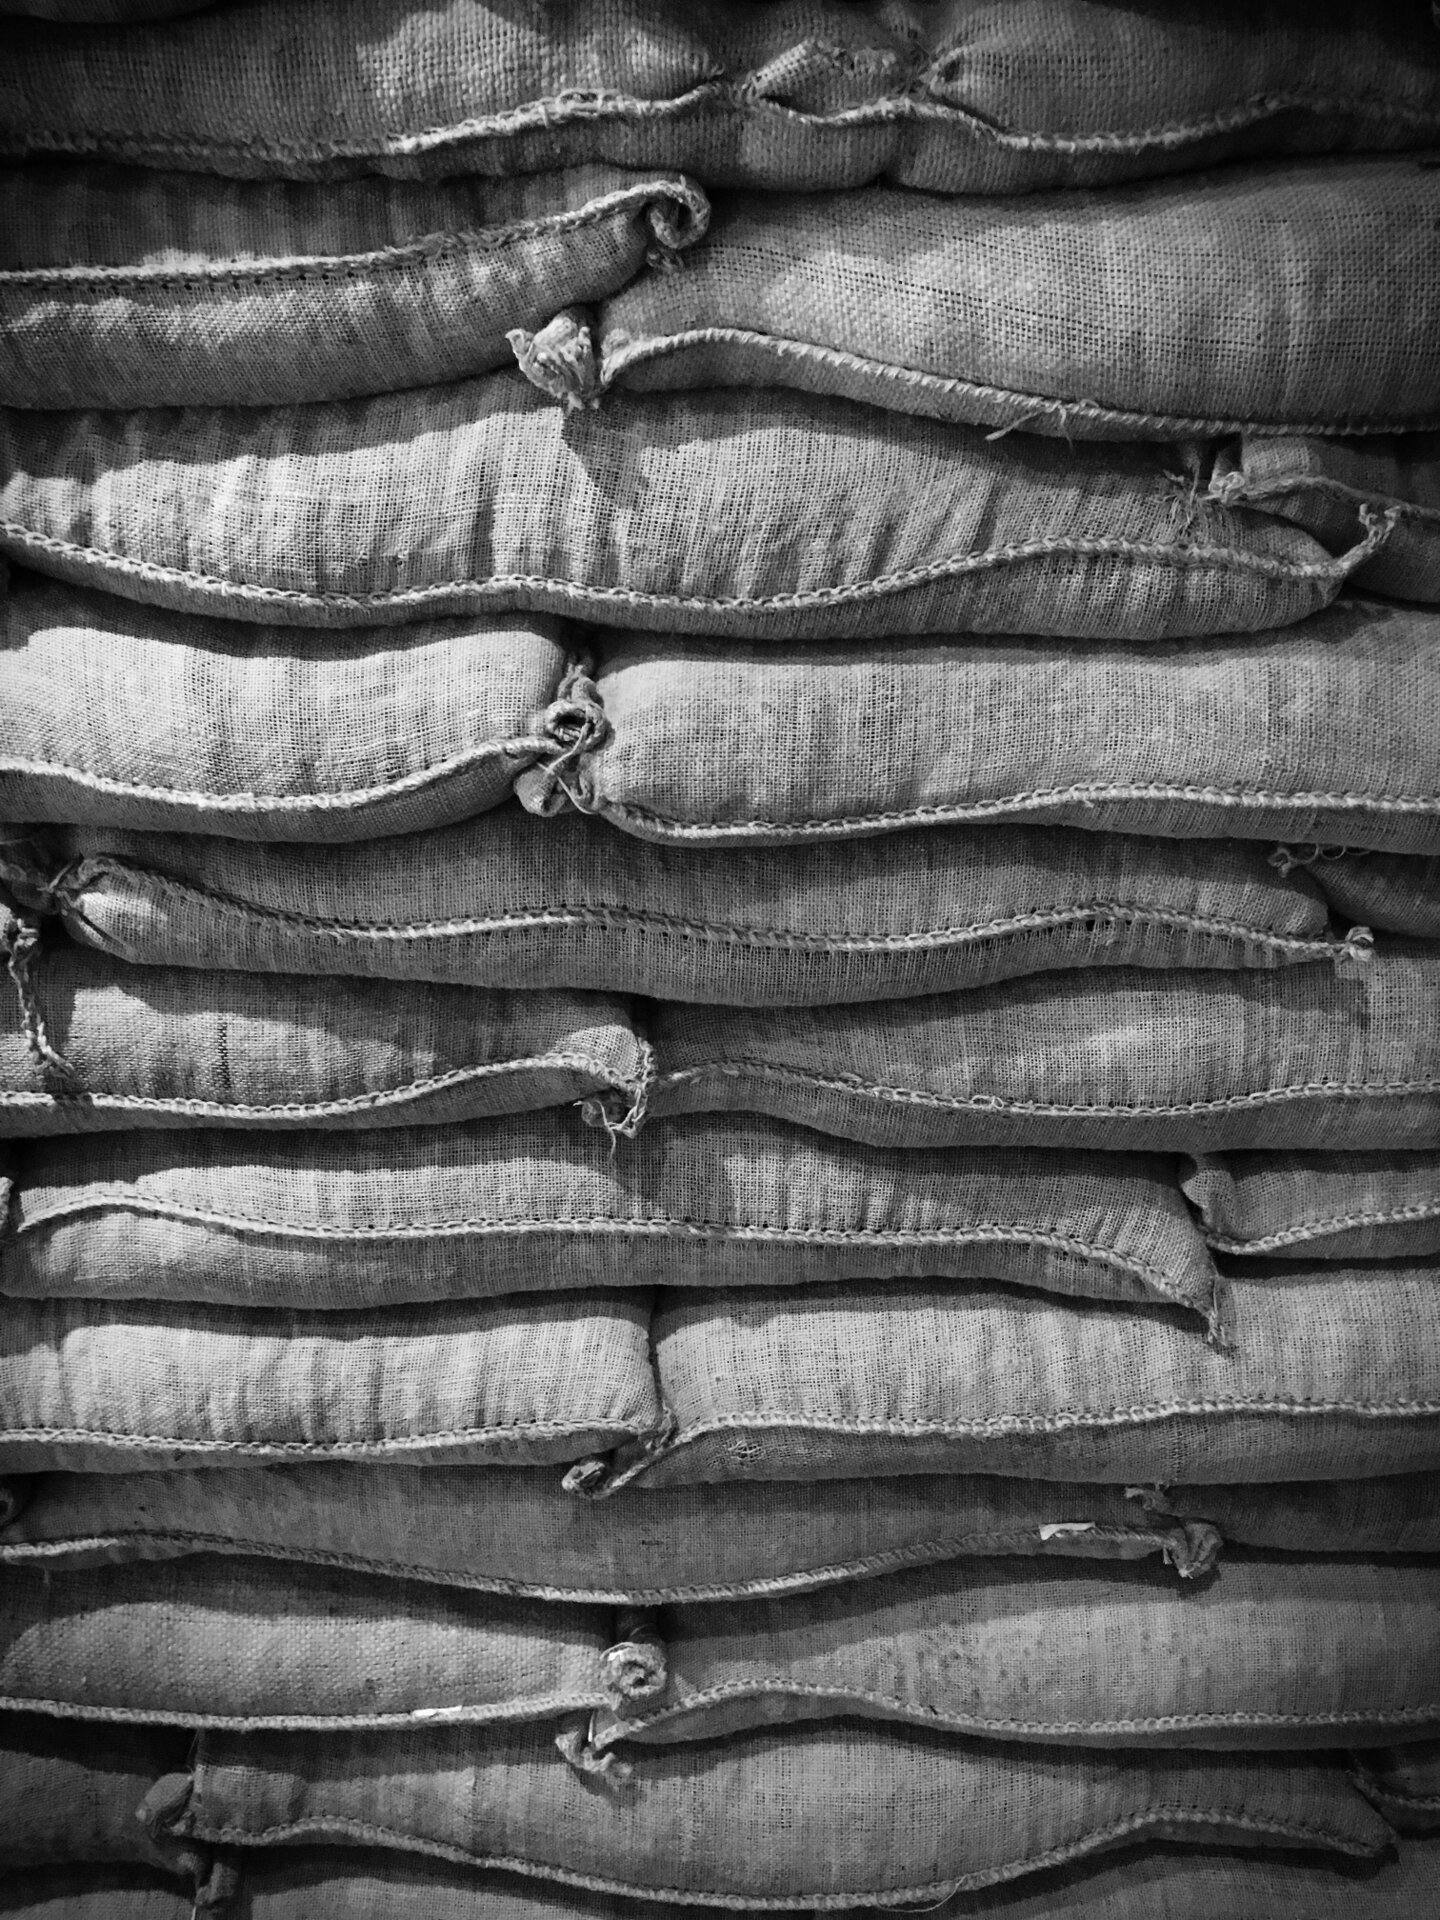 Sacks of green coffee stacked up in a warehouse